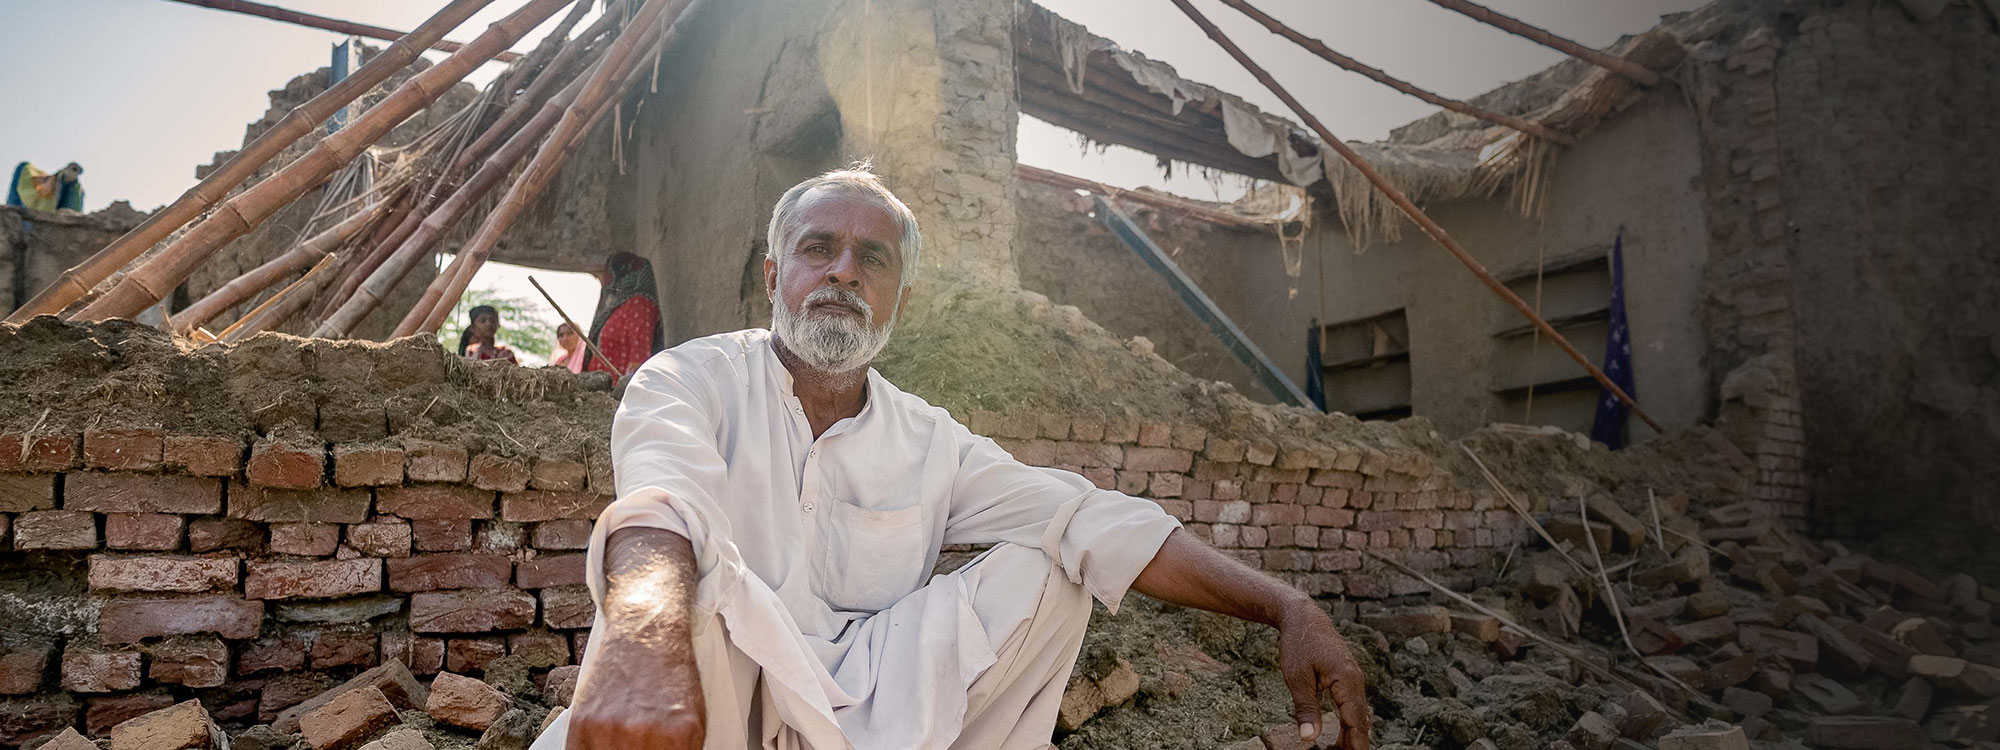 Man in Pakistan crouches outside his home destroyed by flooding